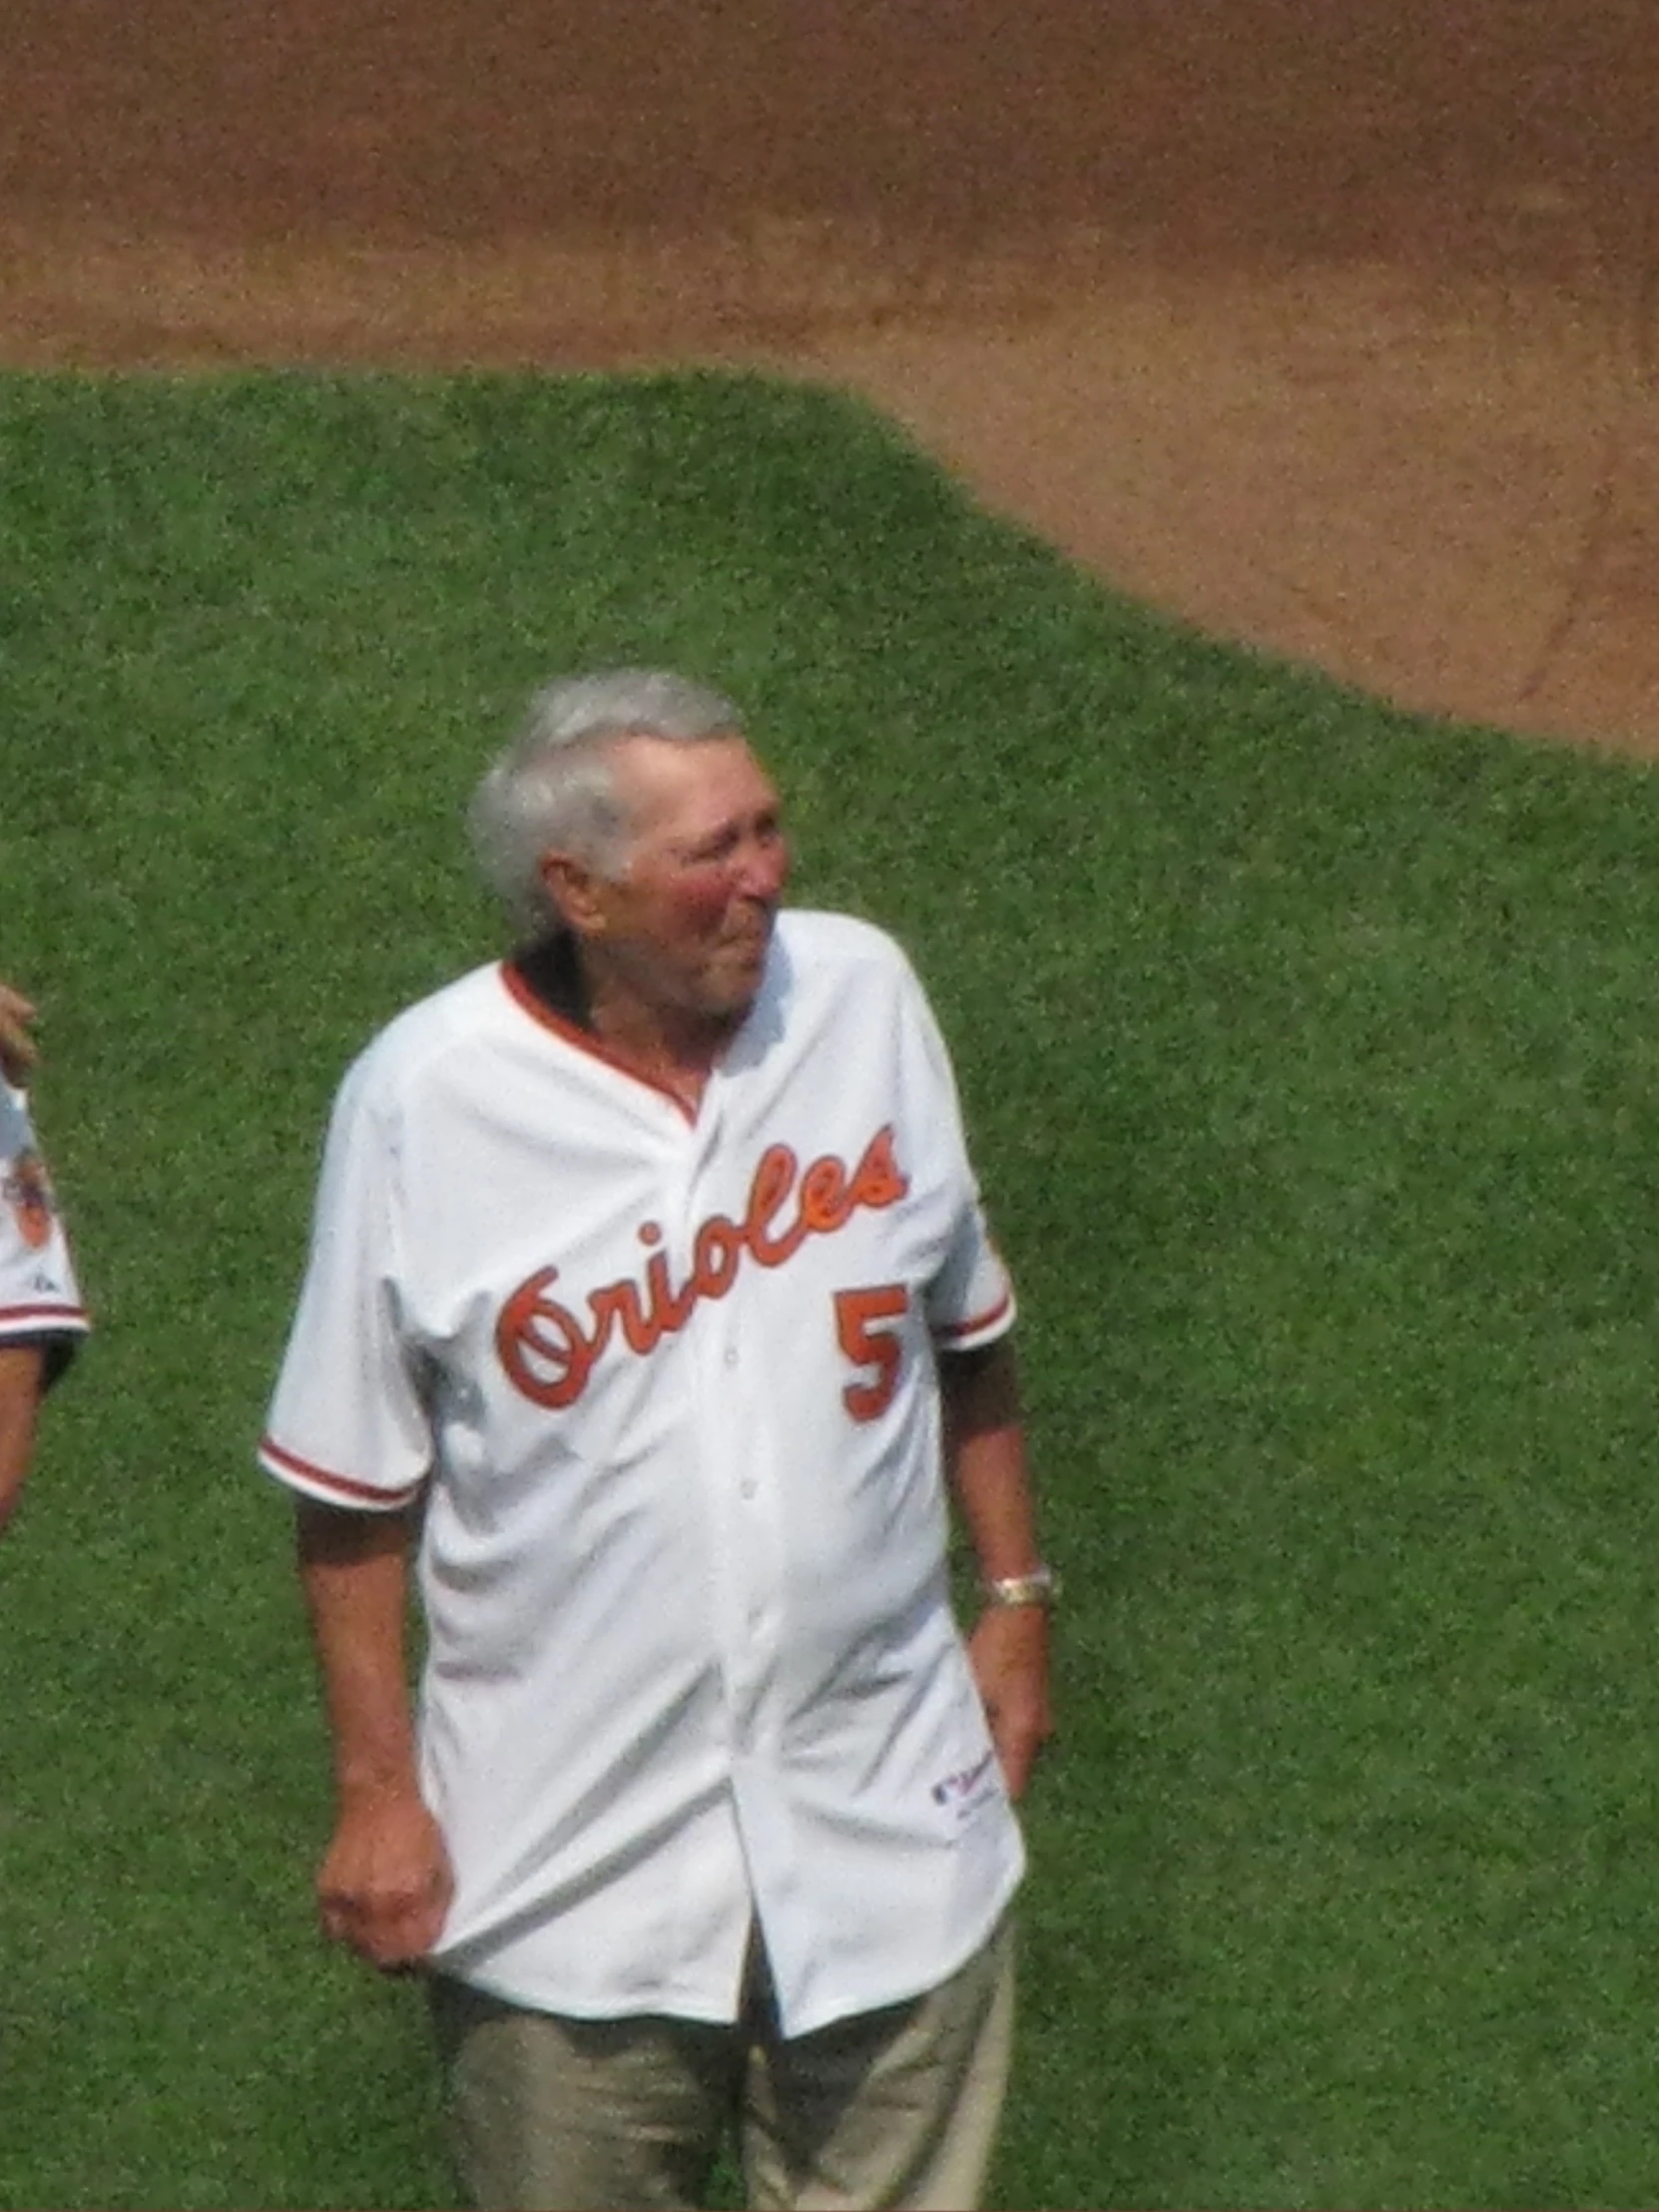 a couple of men standing next to each other on a baseball field